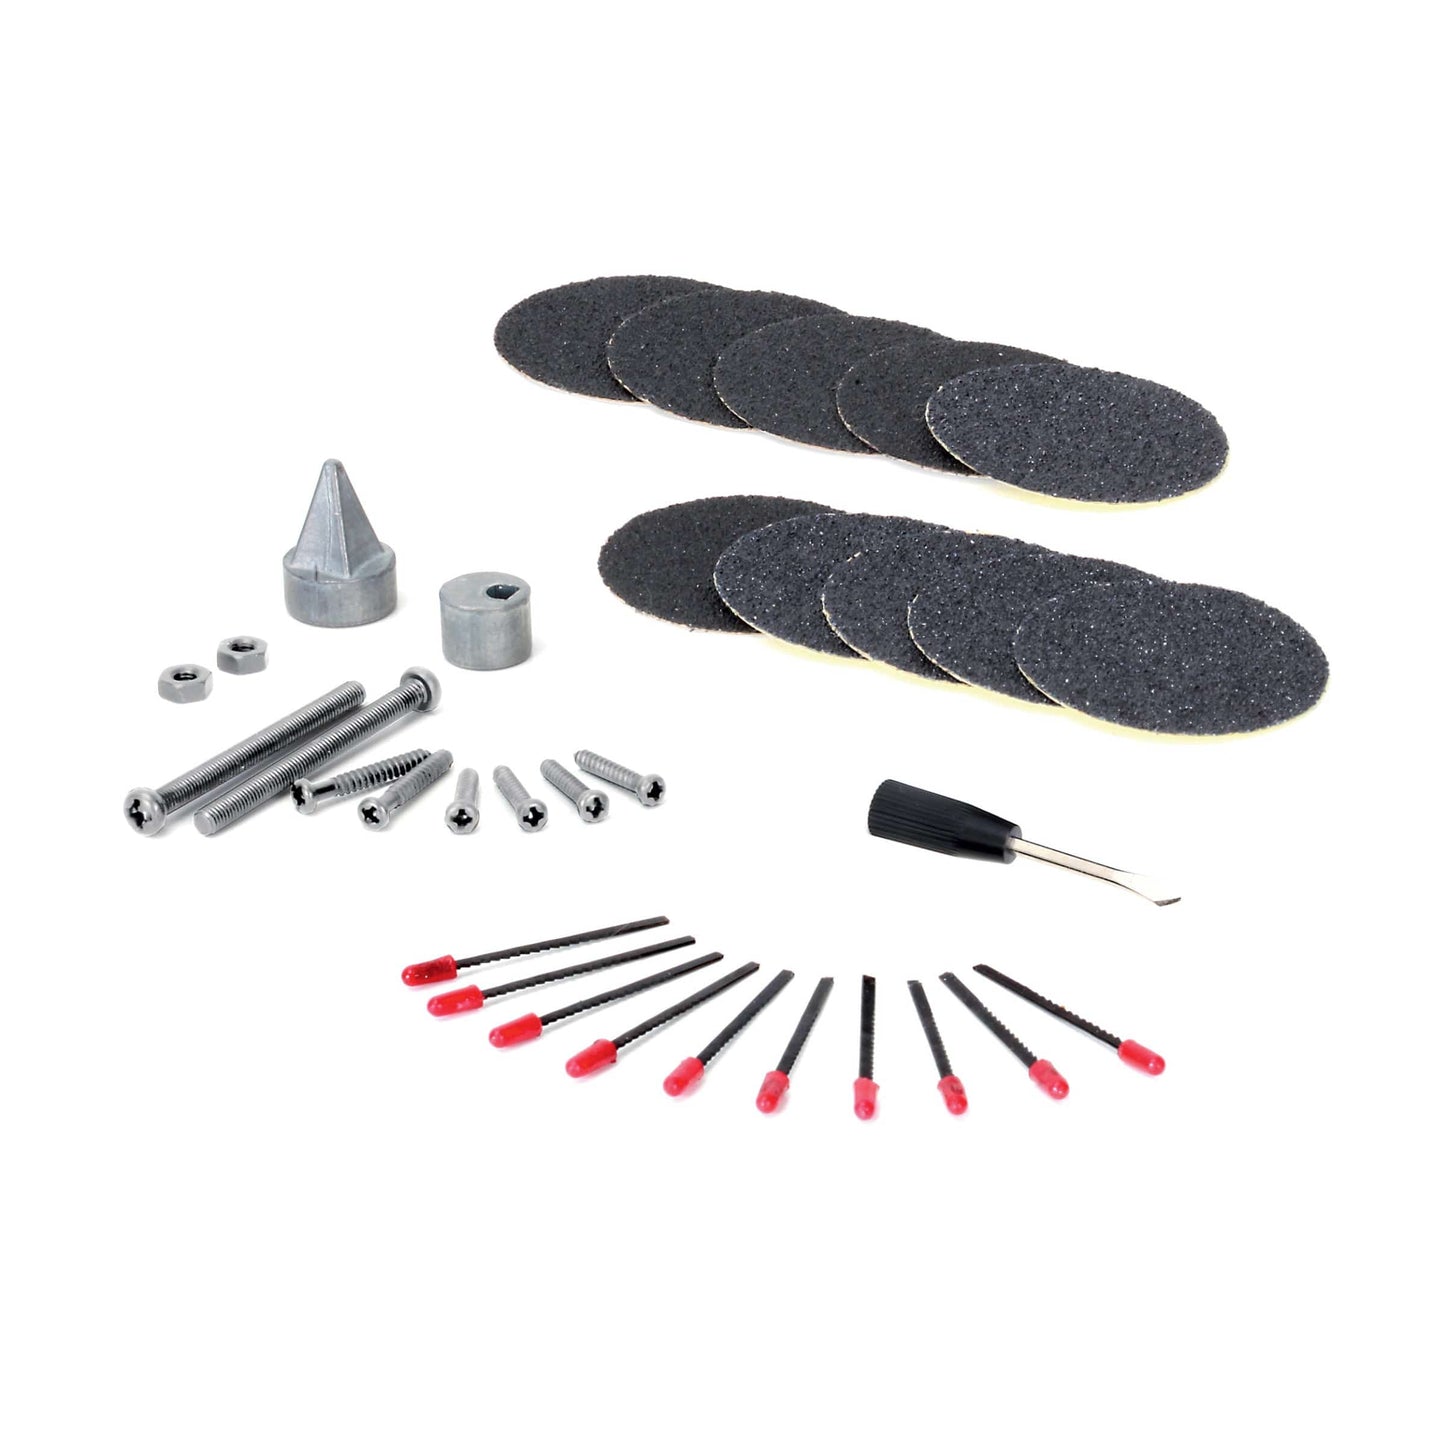 Service Set with Extra Blades, Sanding Disks and Tool Parts